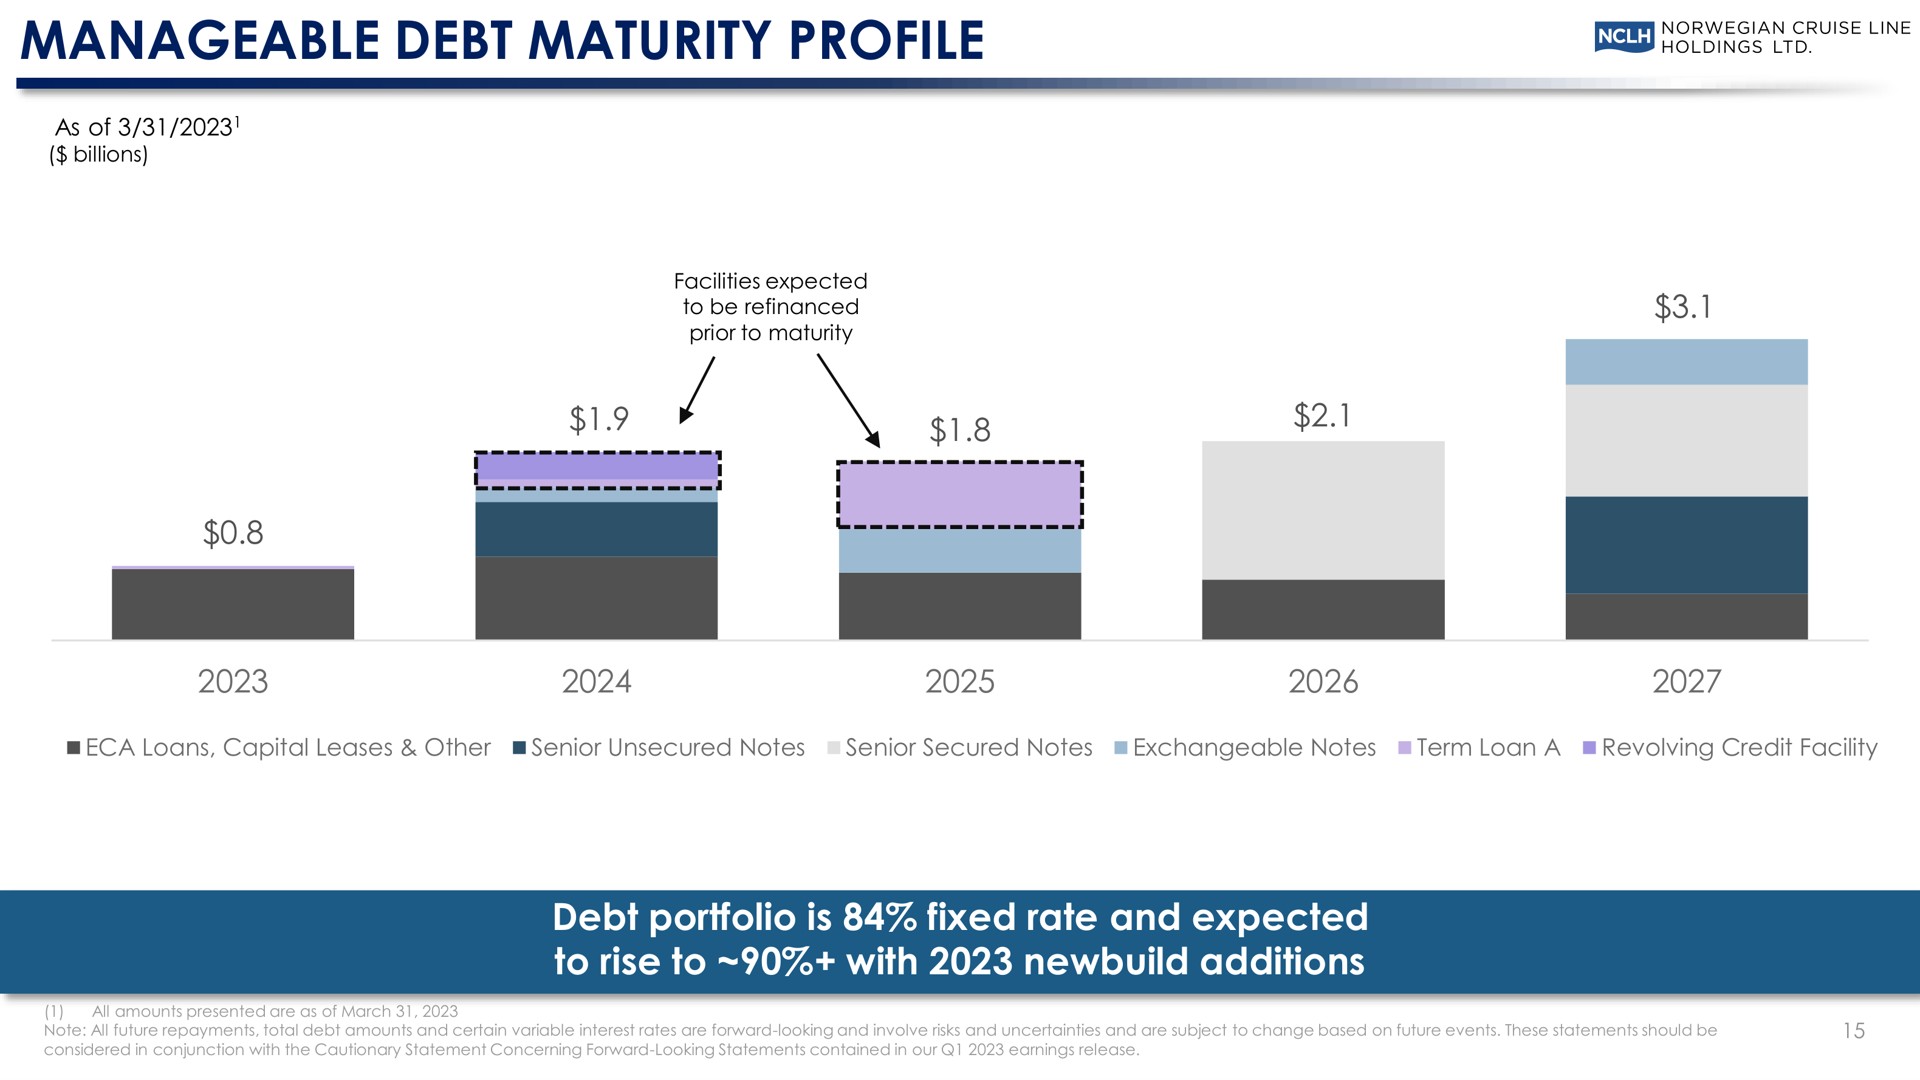 manageable debt maturity profile debt portfolio is fixed rate and expected to rise to with additions cruise line | Norwegian Cruise Line